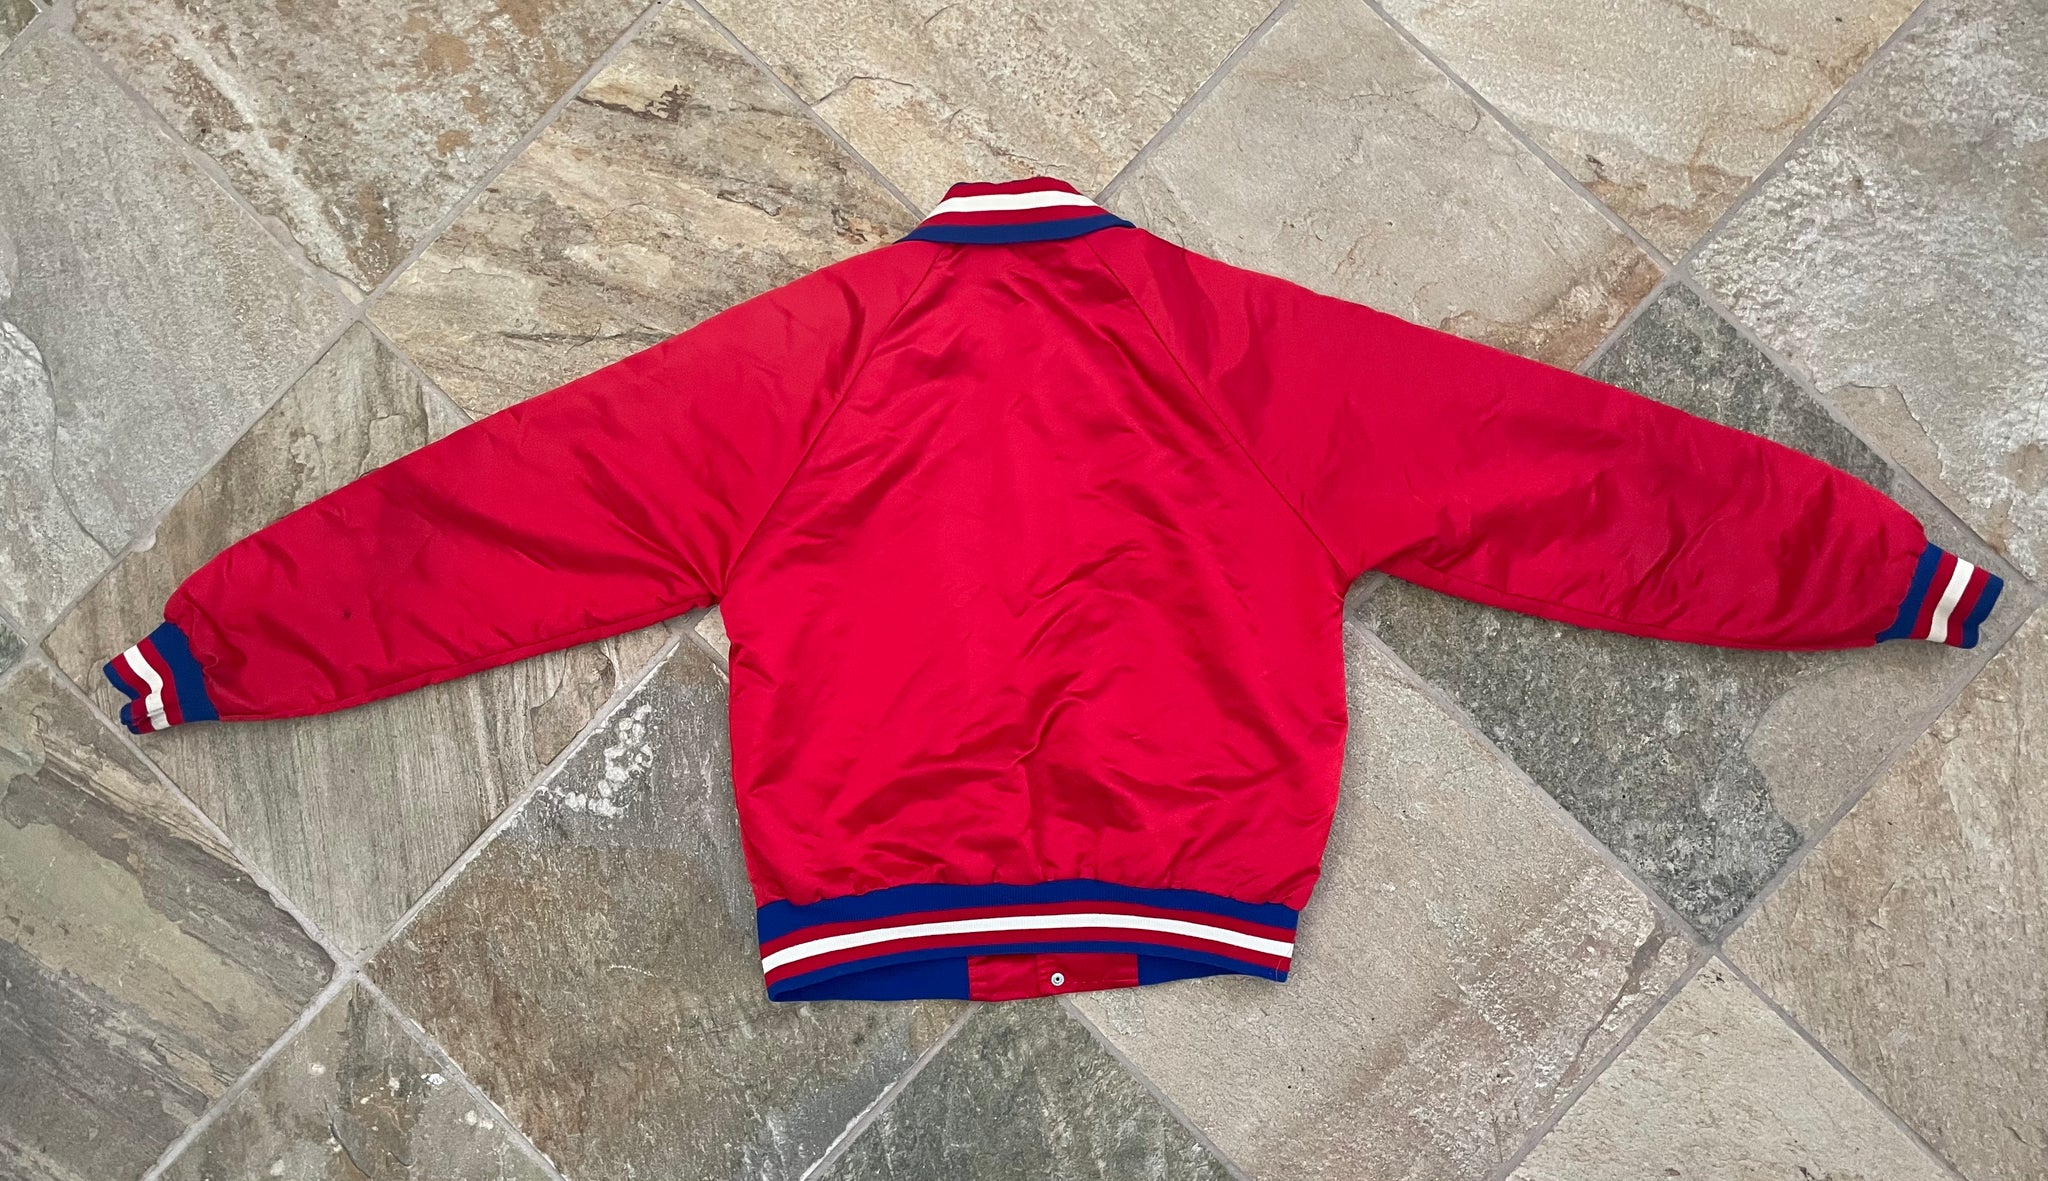 1993 Montreal Canadiens Stanley Cup Starter Satin NHL Bomber Jacket Size XL  – Rare VNTG